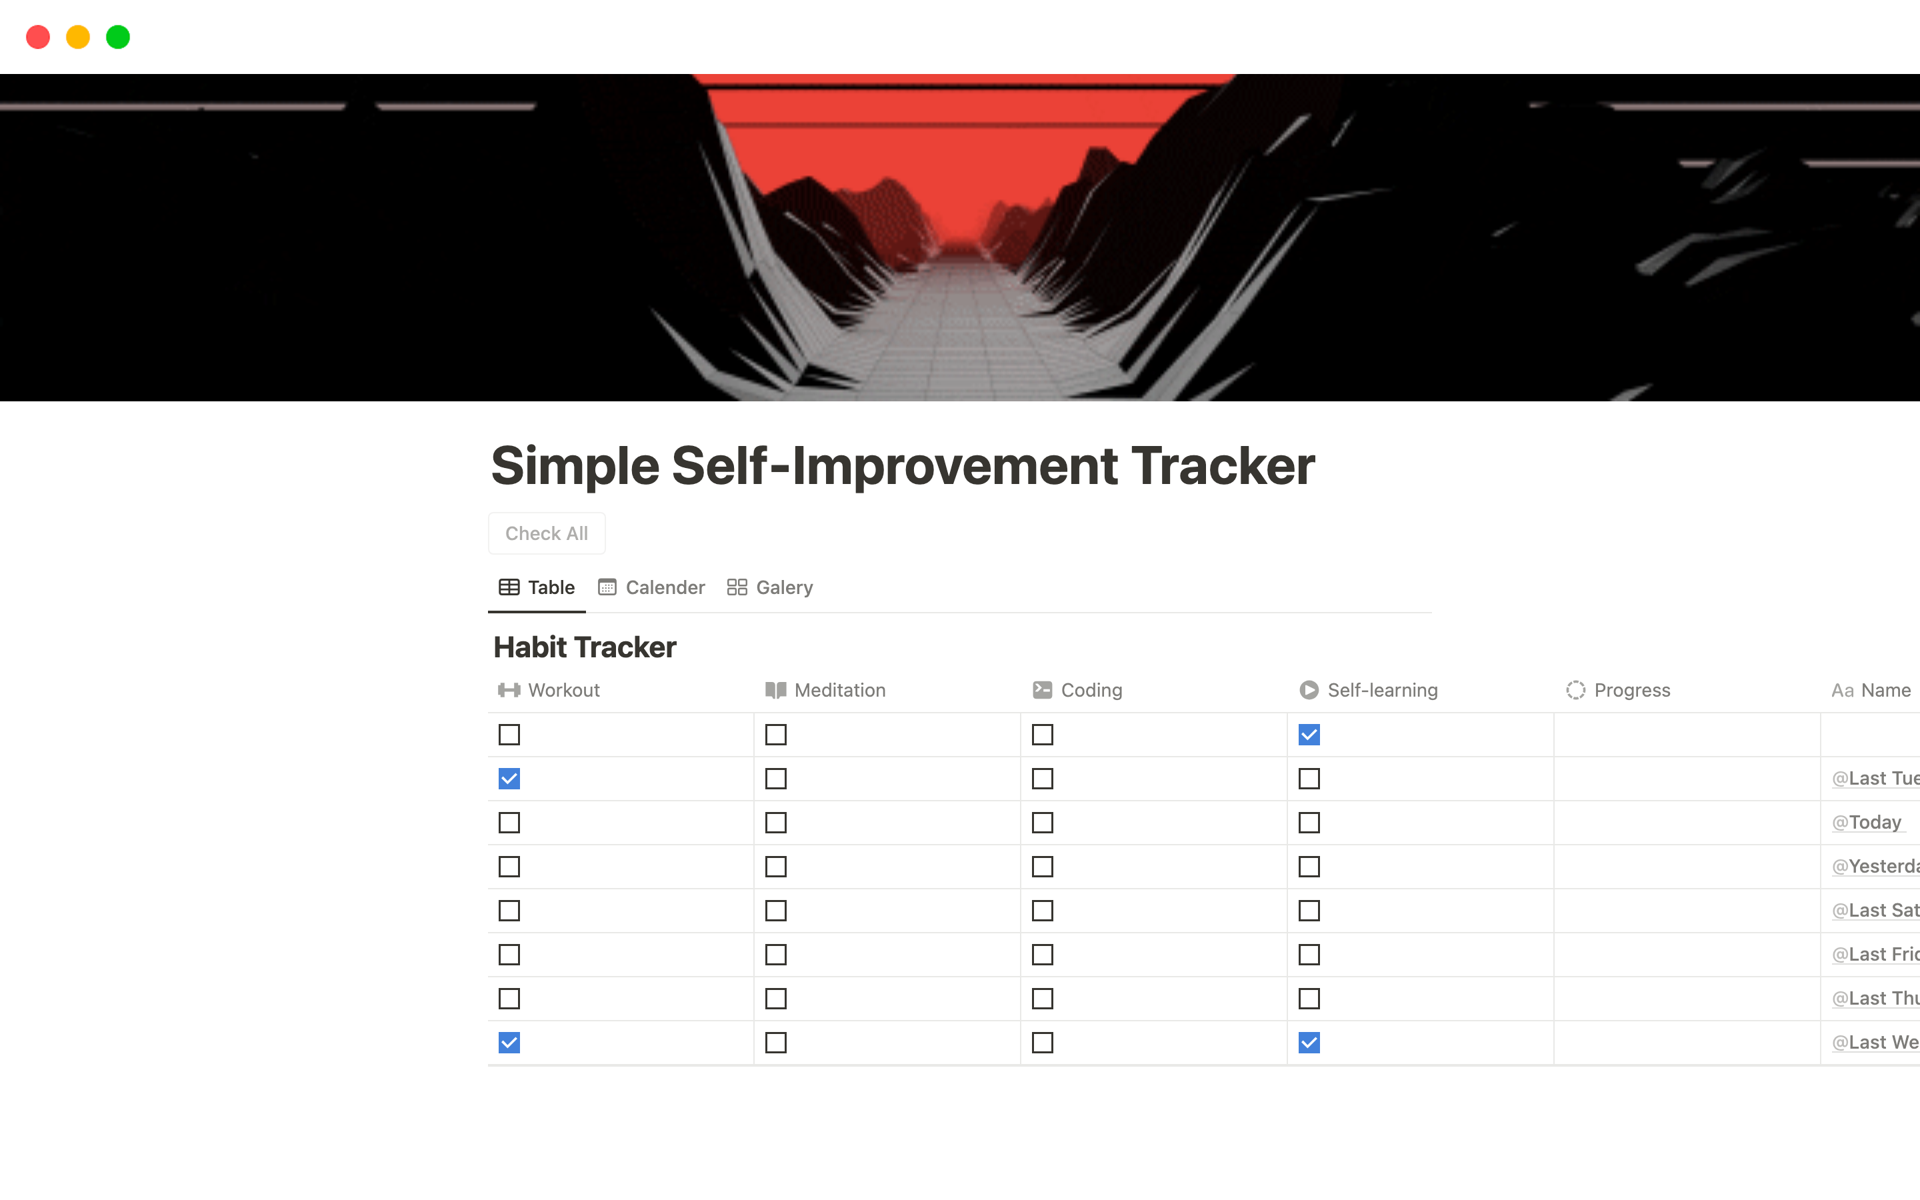 A very basic tracker for the four most important things a person should do, aside from work or study, in order to achieve self-improvement.